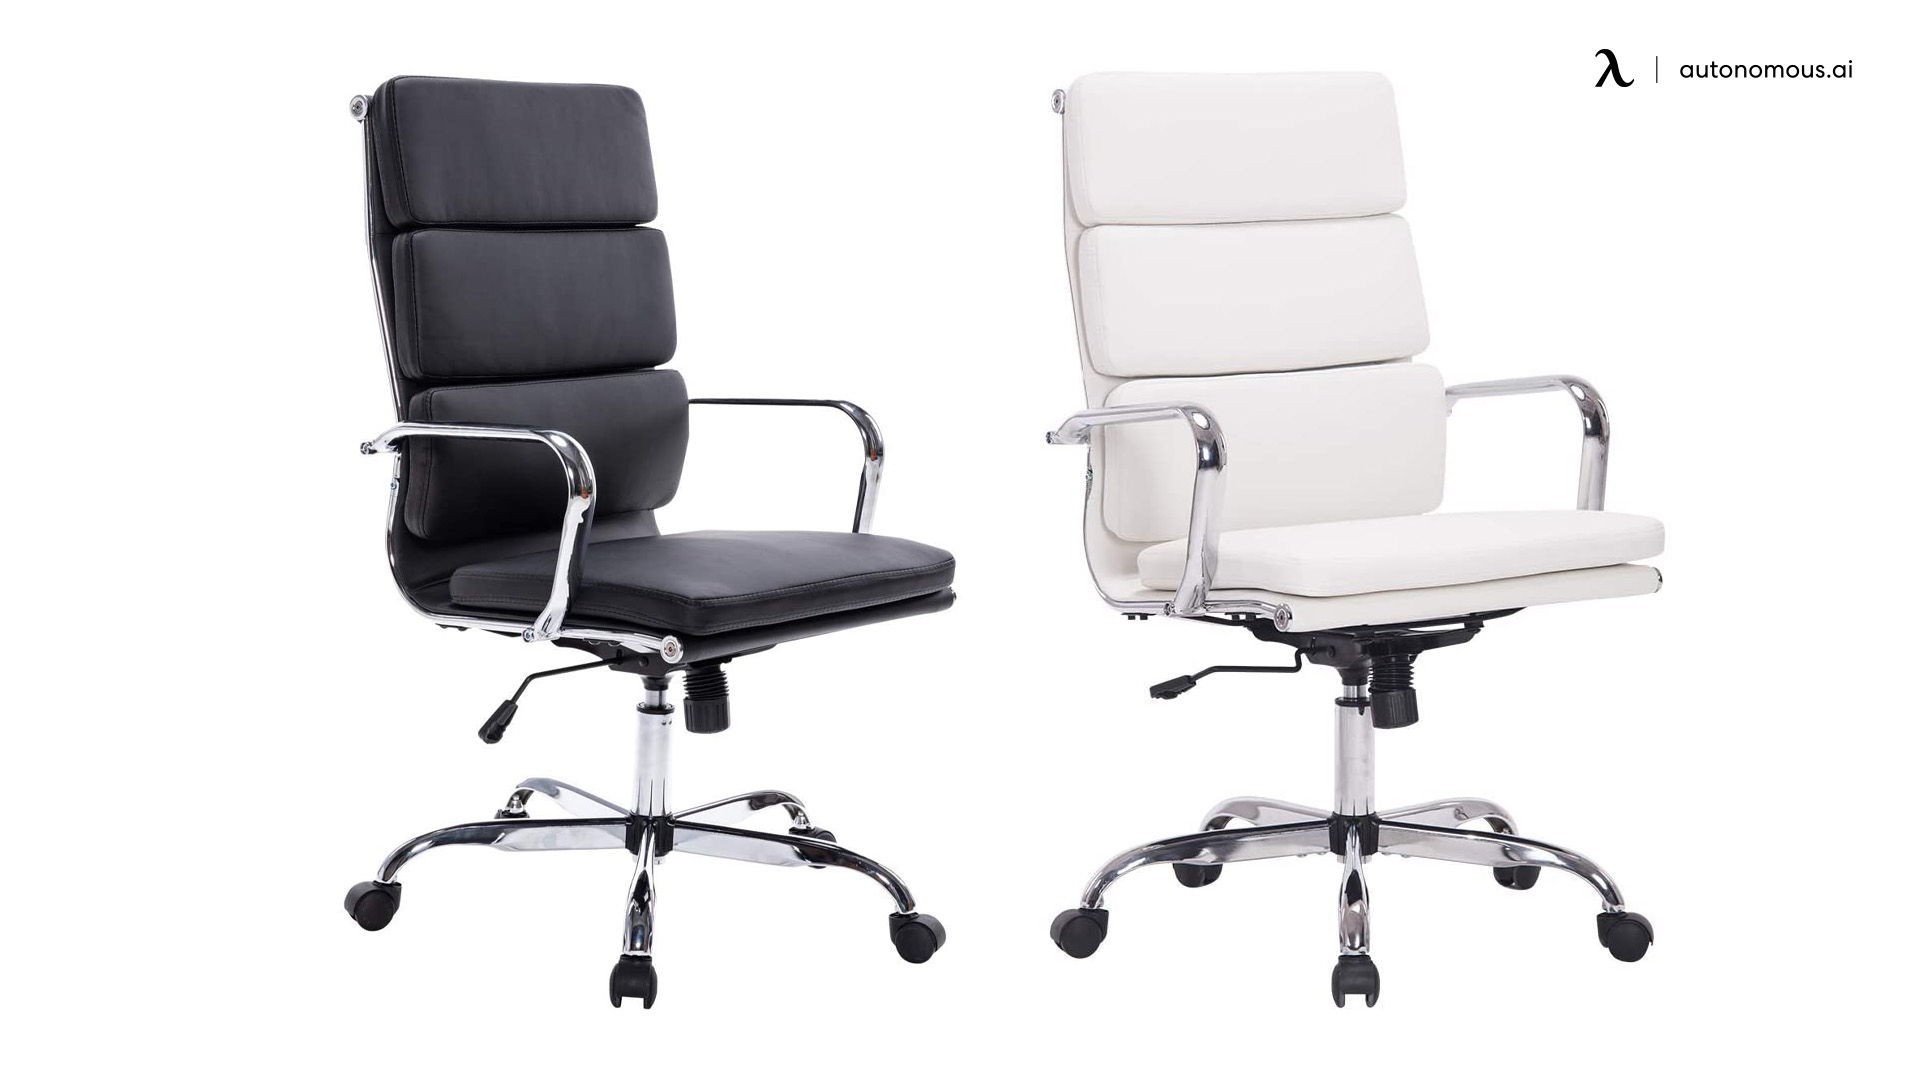 Top 5 Conference Room Chairs for Office in 2021